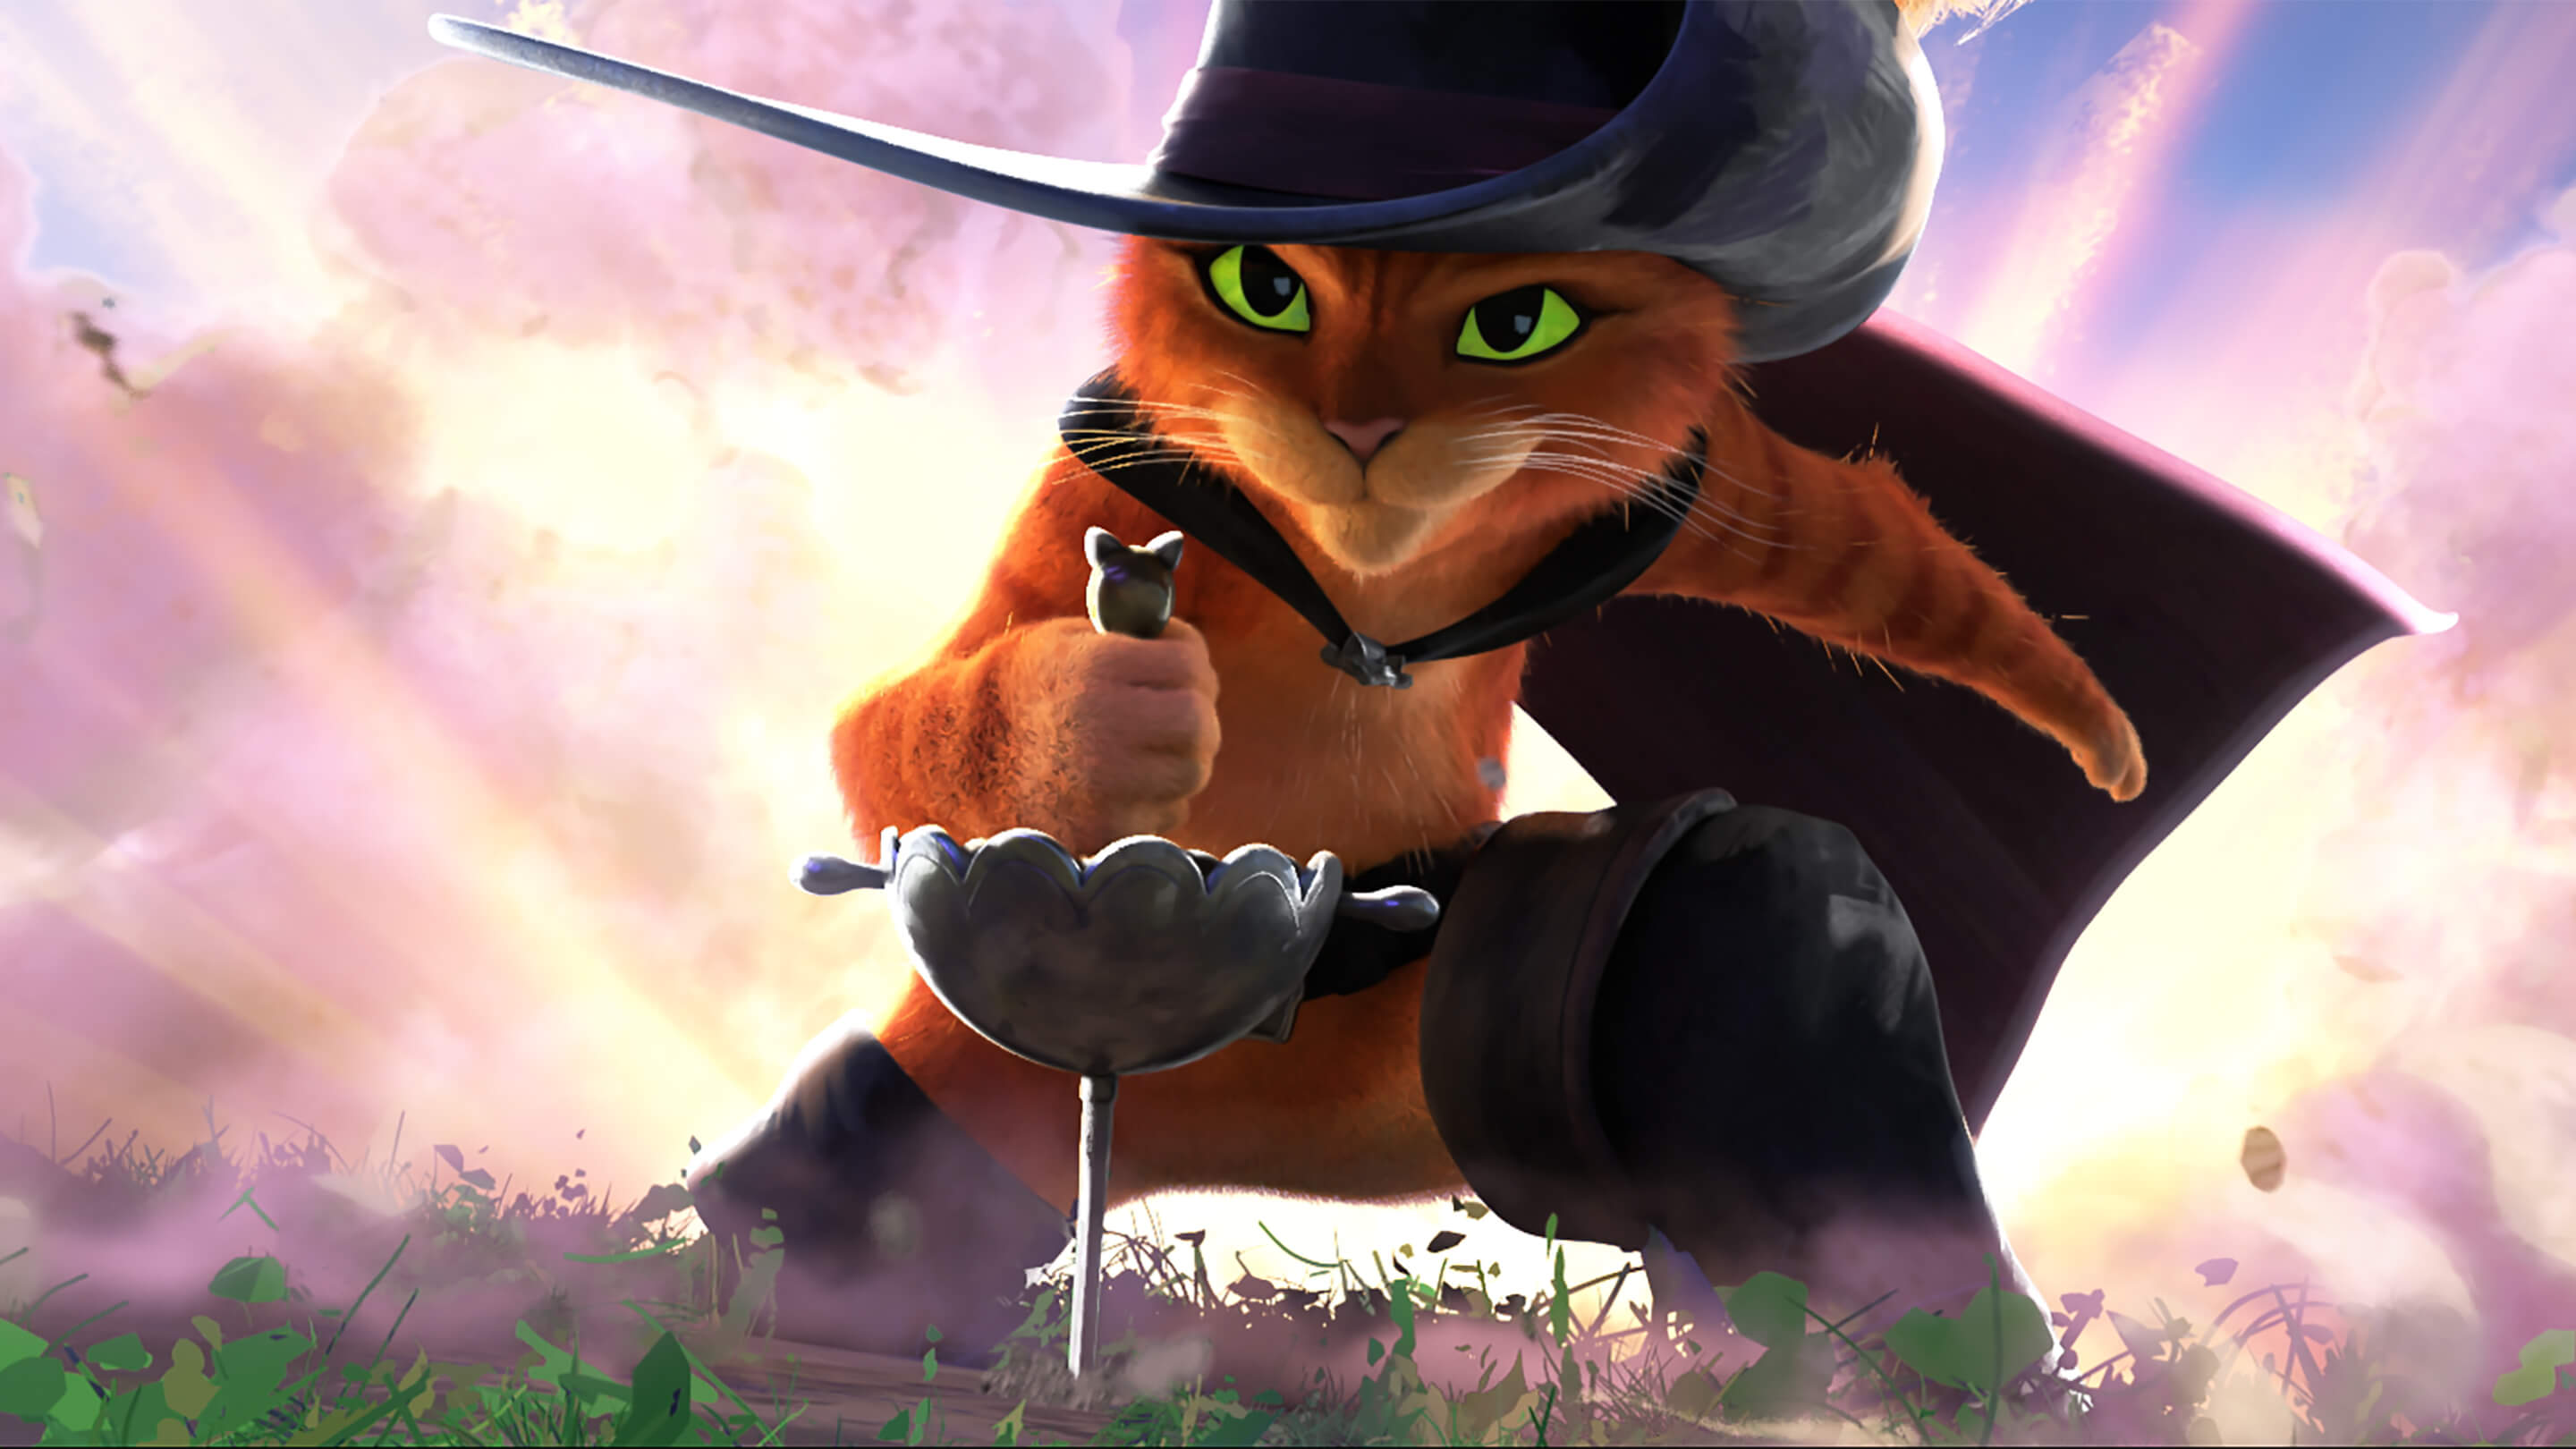 Puss in Boots (voiced by Antonio Banderas) in Puss in Boots: The Last Wish